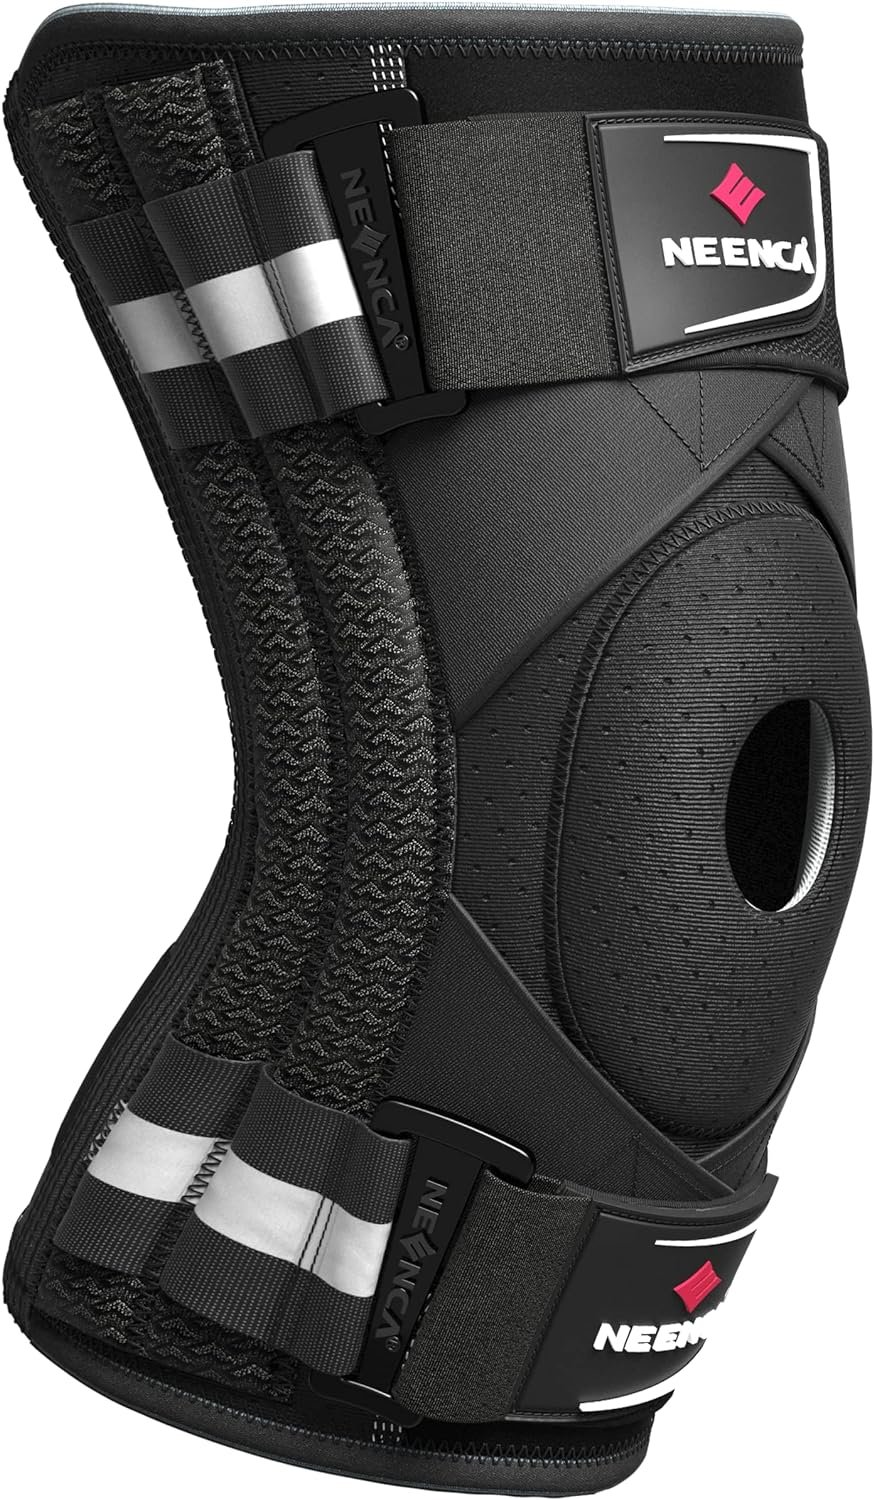 NEENCA Professional Knee Brace for Knee Pain, Adjustable Knee Support with Patented X-Strap Fixing System, Support and Stability for Joint Pain Relief, Arthritis, Meniscus Tear,ACL,PCL, Runner, Sports